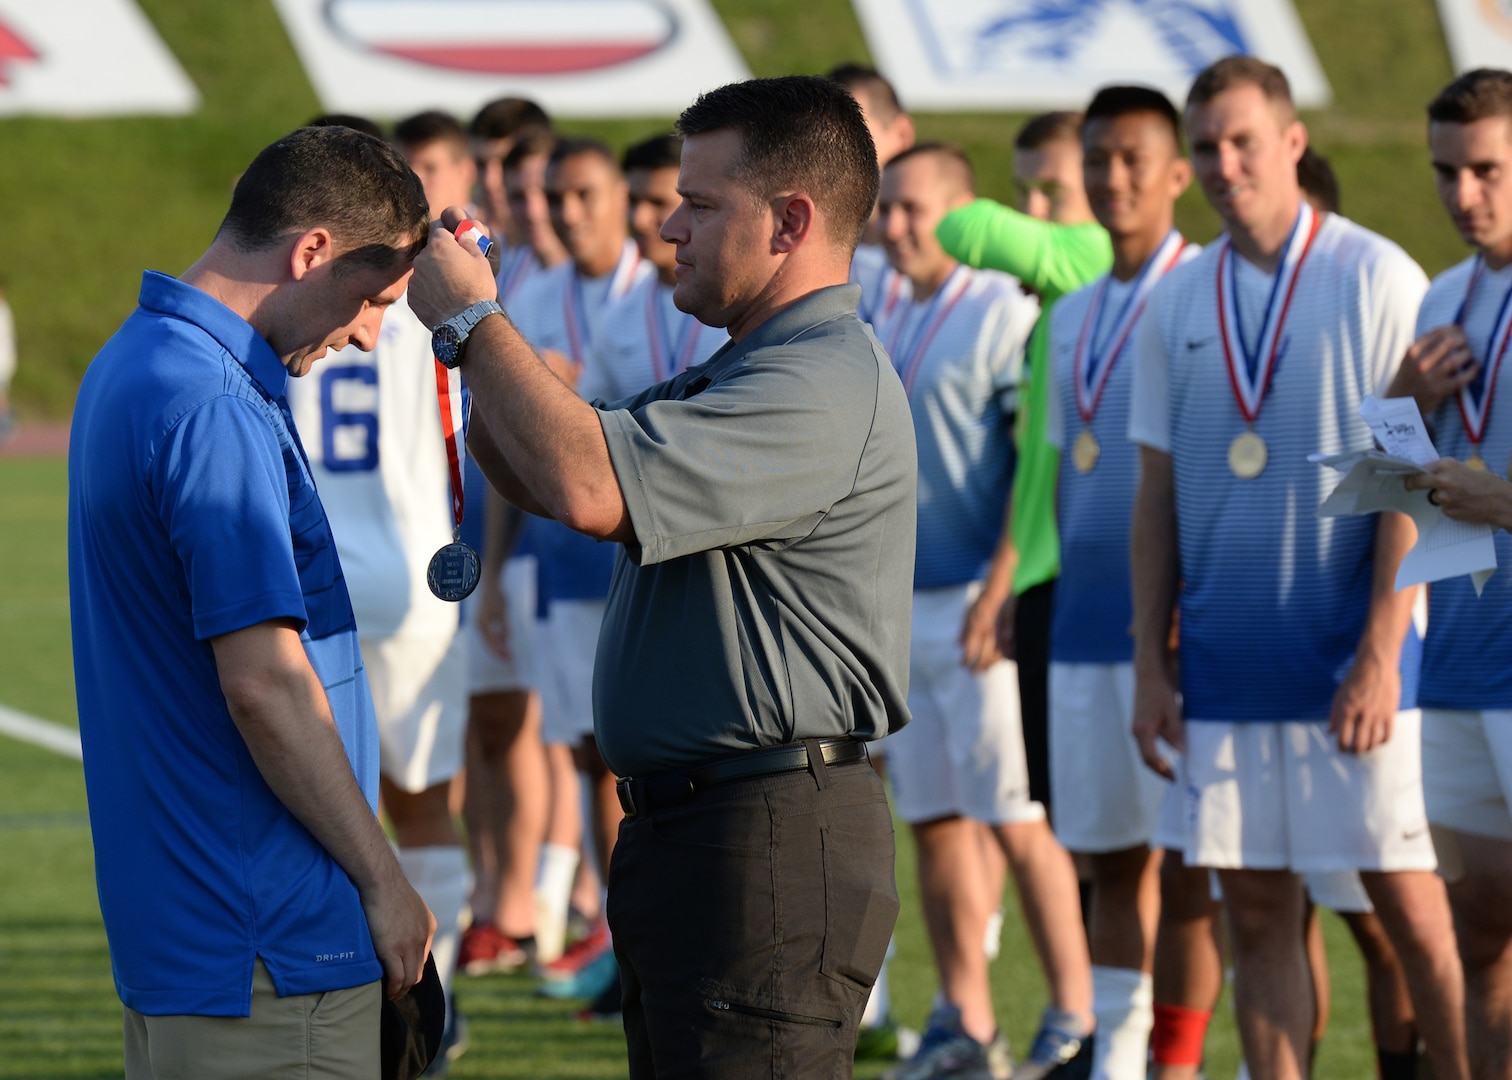 The championship is held at Fort Bragg, N.C. from 2-10 June, and features Service members from the Army, Marine Corps, Navy (including Coast Guard) and Air Force. (U.S. Navy photo by Mass Communication Specialist 2nd Class John Benson/Released)